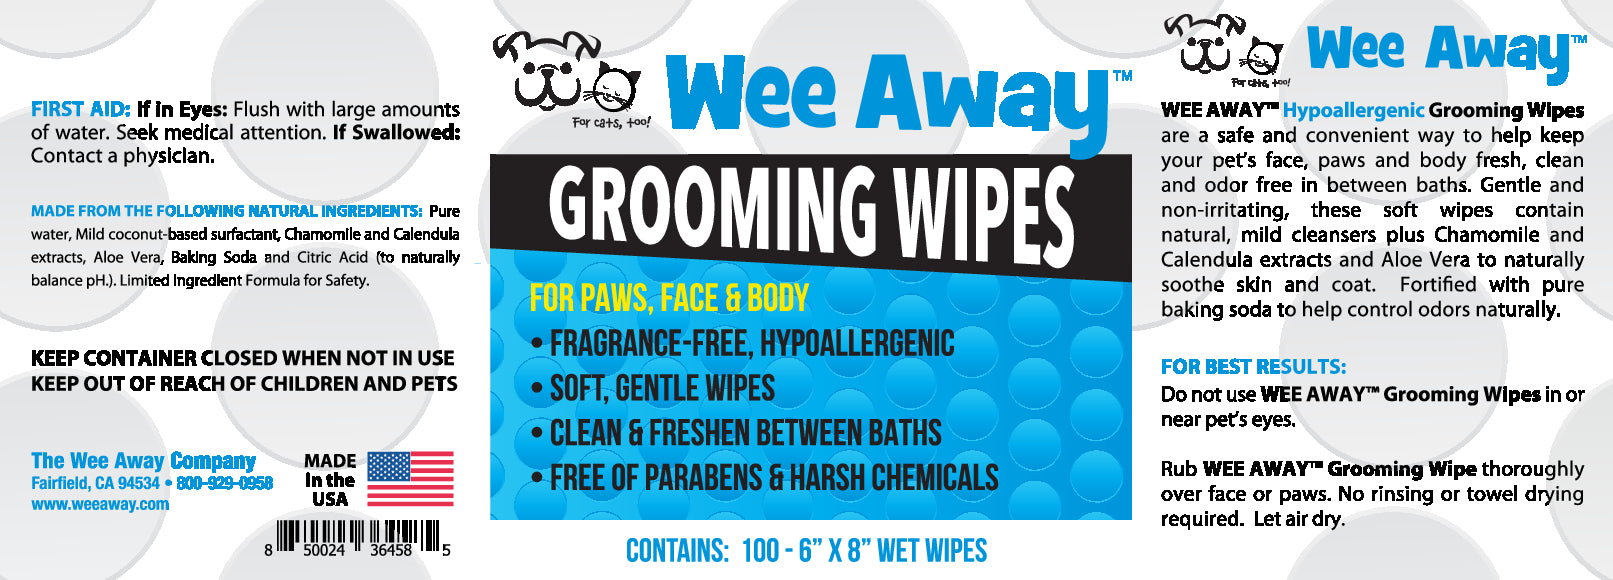 Wee Away Grooming Wipes For Dogs